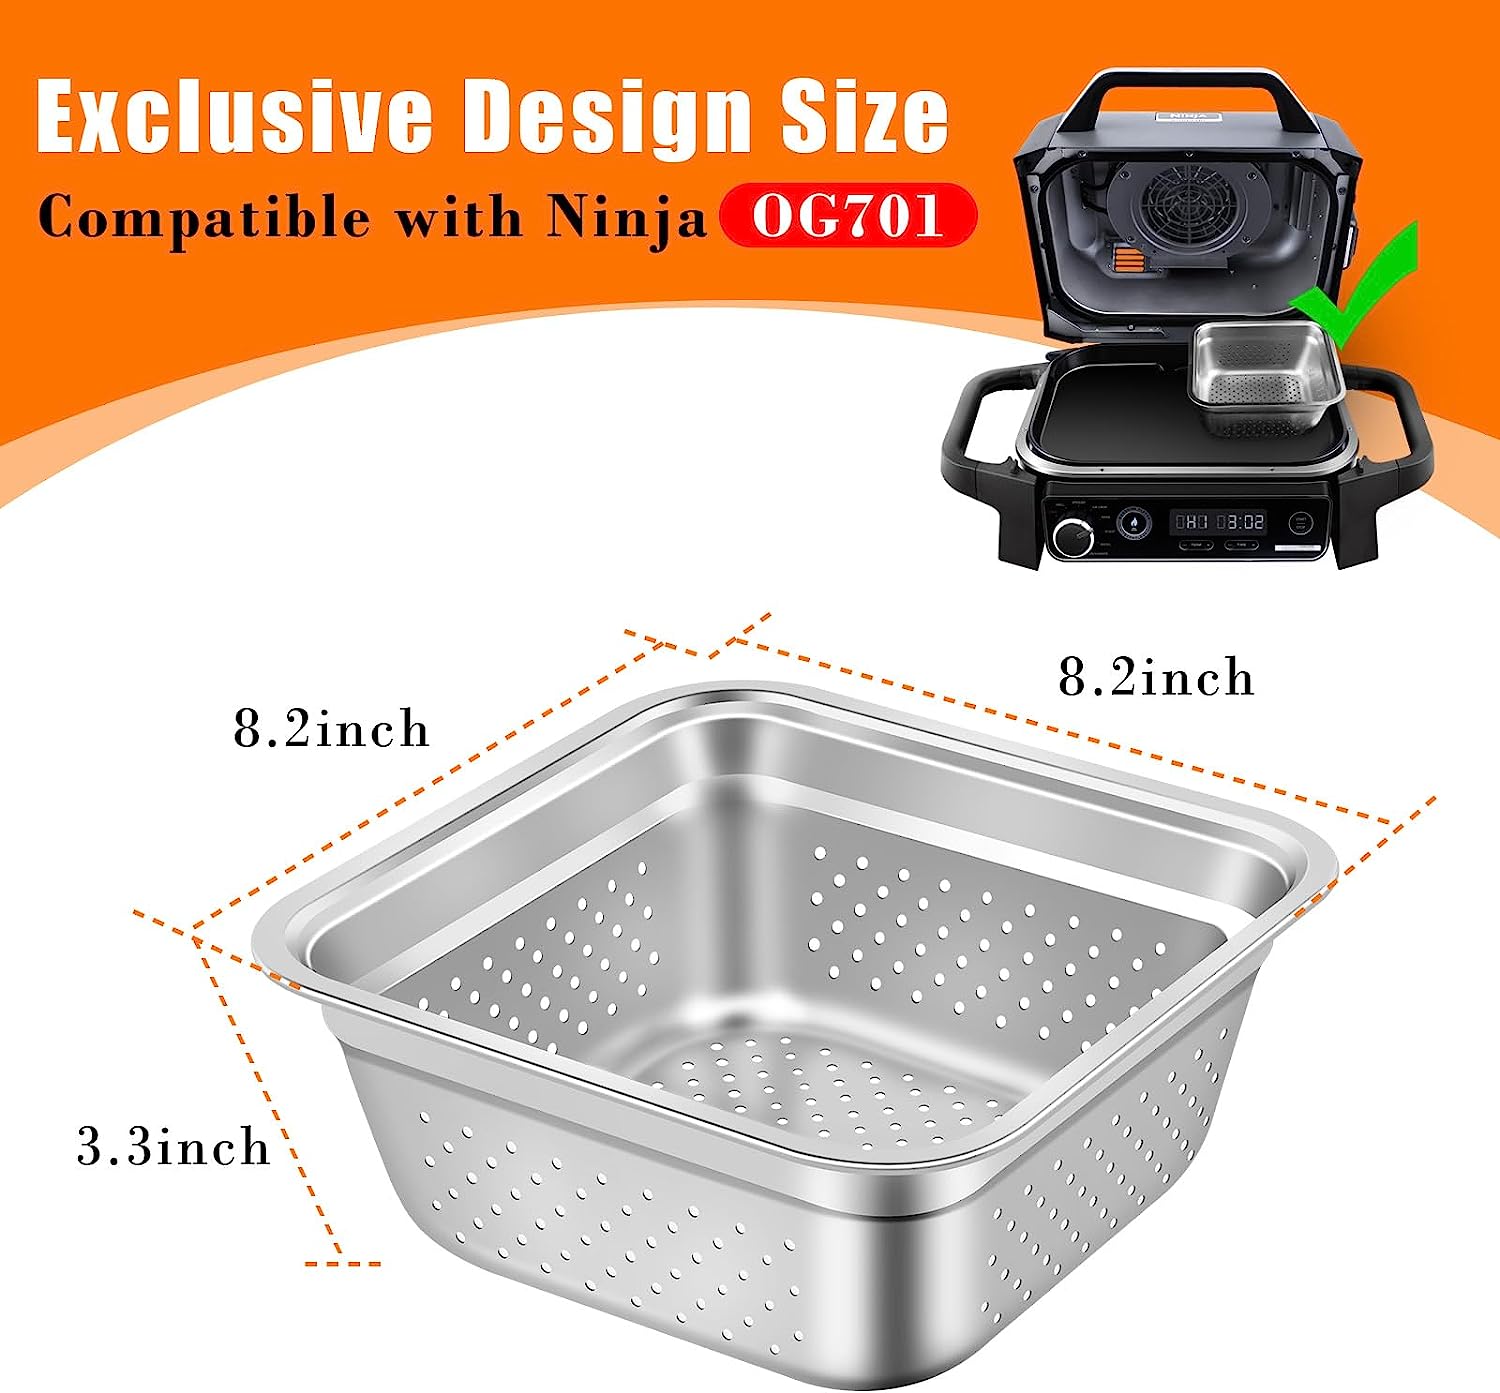 Air Fryer Basket for Oven,Stainless Steel Crisper Tray and Pan